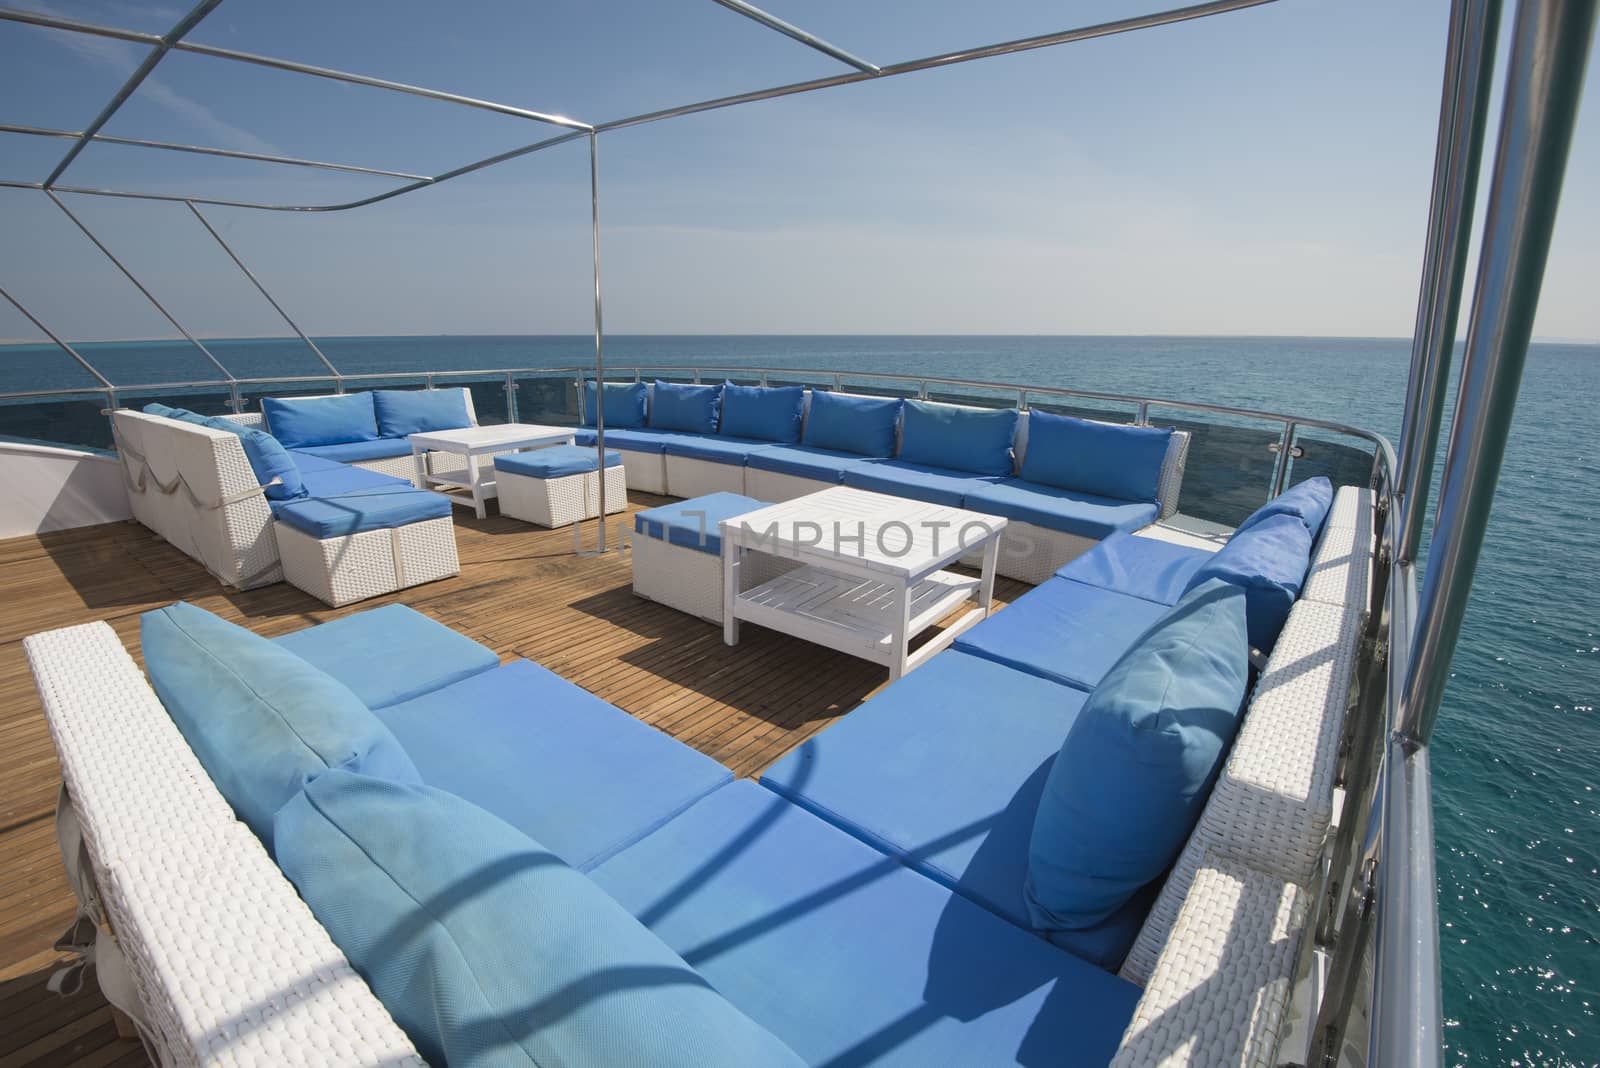 Rear teak deck of a large luxury motor yacht with chairs sofa table and tropical sea view background